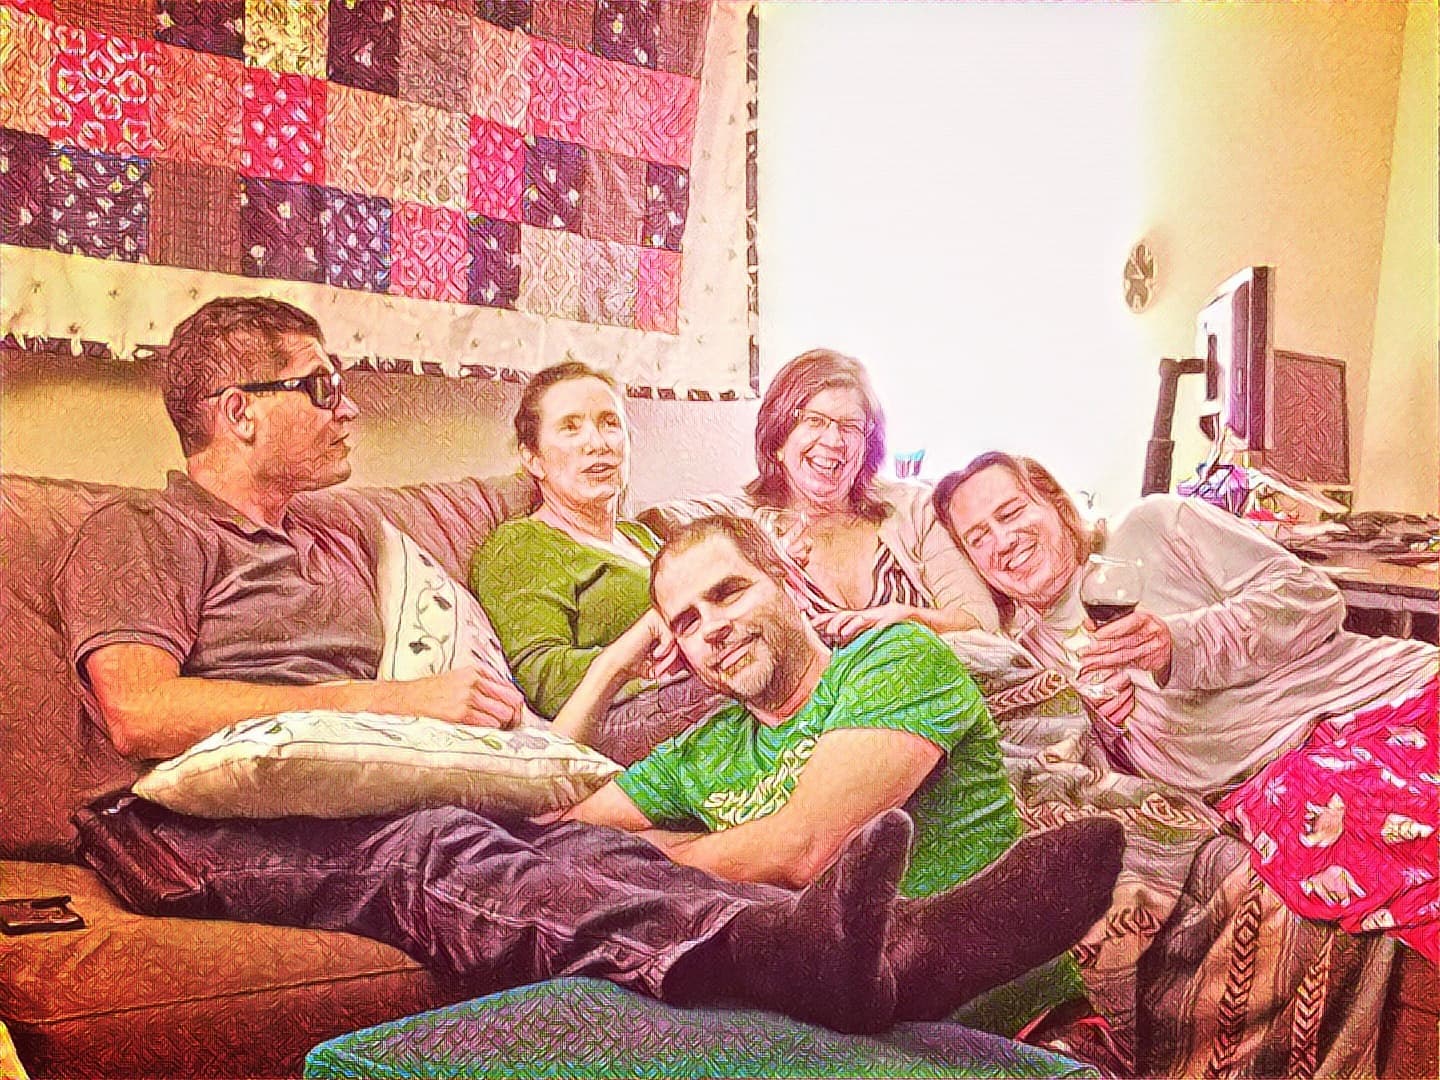 Five friends on a couch, enjoying a bottle of wine.